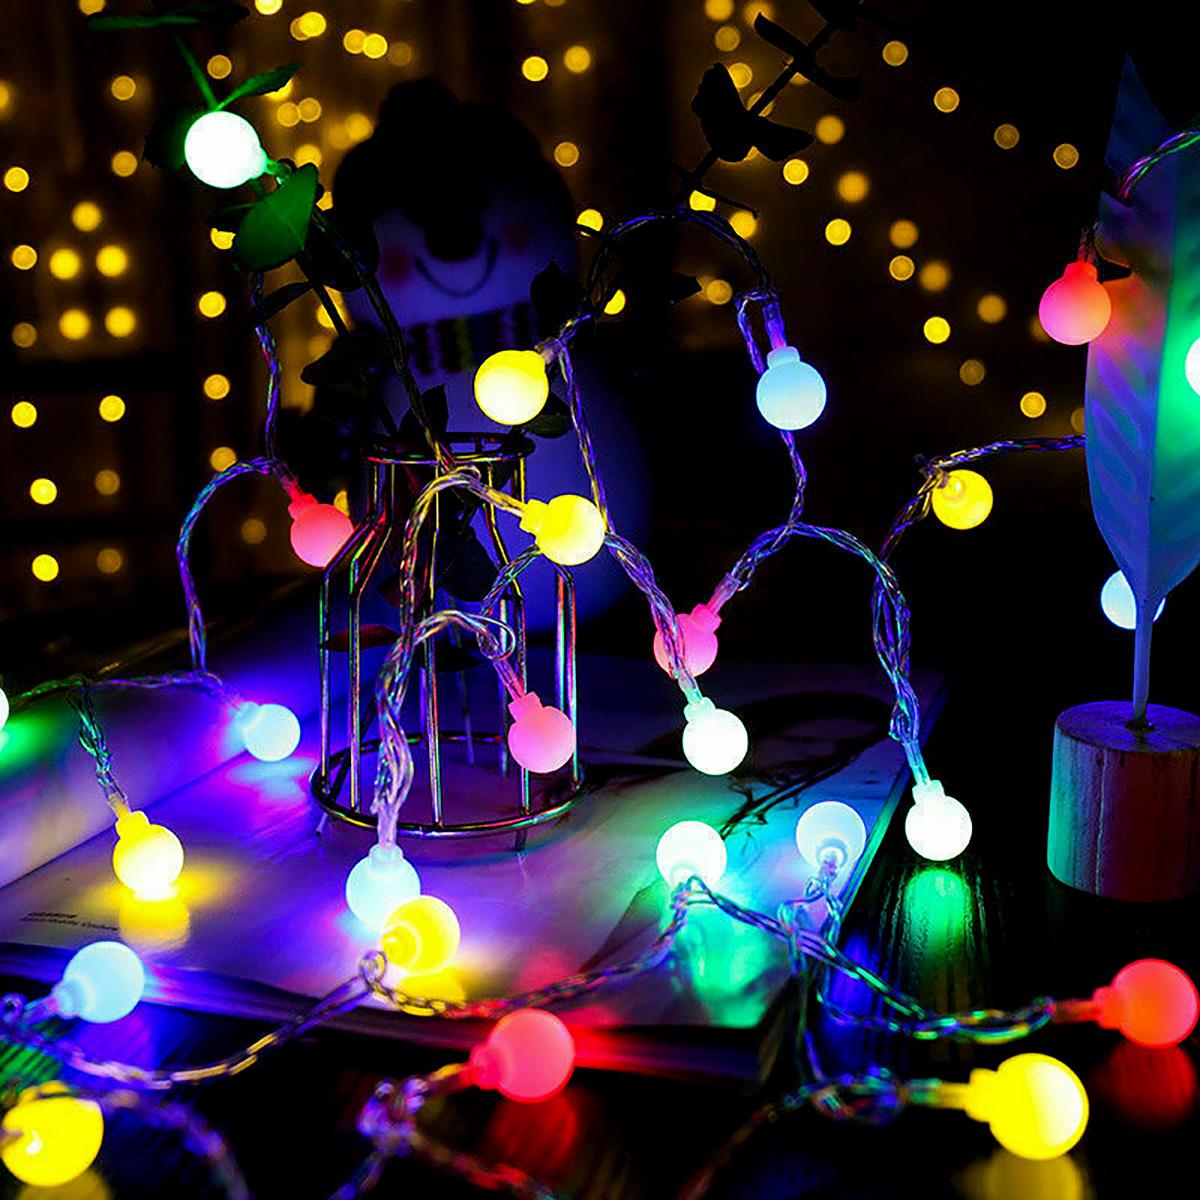 200 Berry Christmas LED Lights Multicolour by Geezy - The Magic Toy Shop